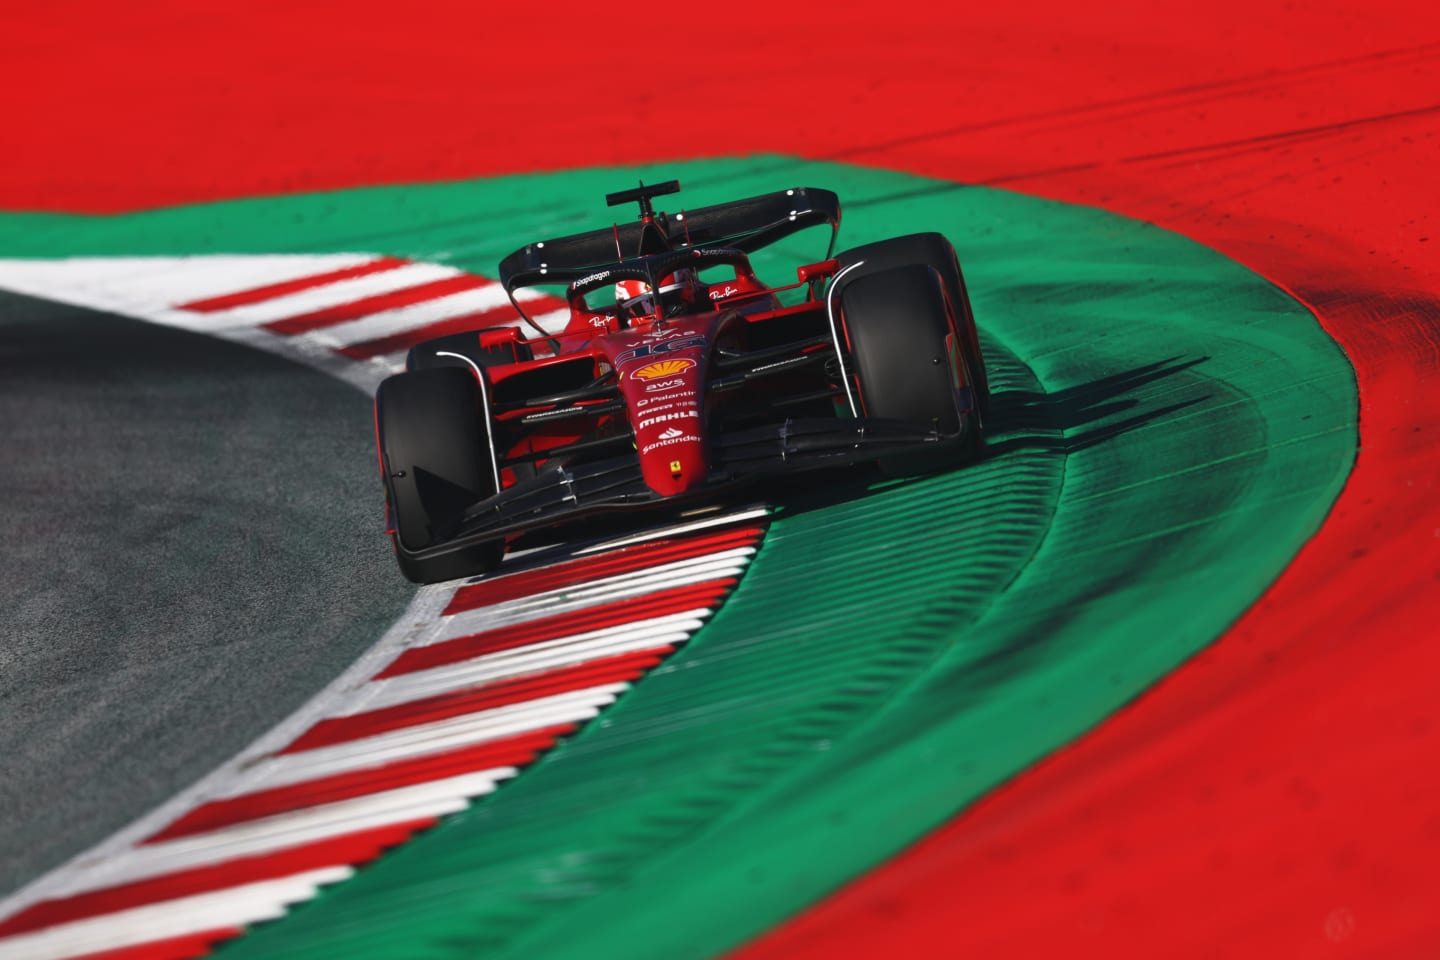 SPIELBERG, AUSTRIA - JULY 08: Charles Leclerc of Monaco driving the (16) Ferrari F1-75 on track during qualifying ahead of the F1 Grand Prix of Austria at Red Bull Ring on July 08, 2022 in Spielberg, Austria. (Photo by Clive Rose/Getty Images)